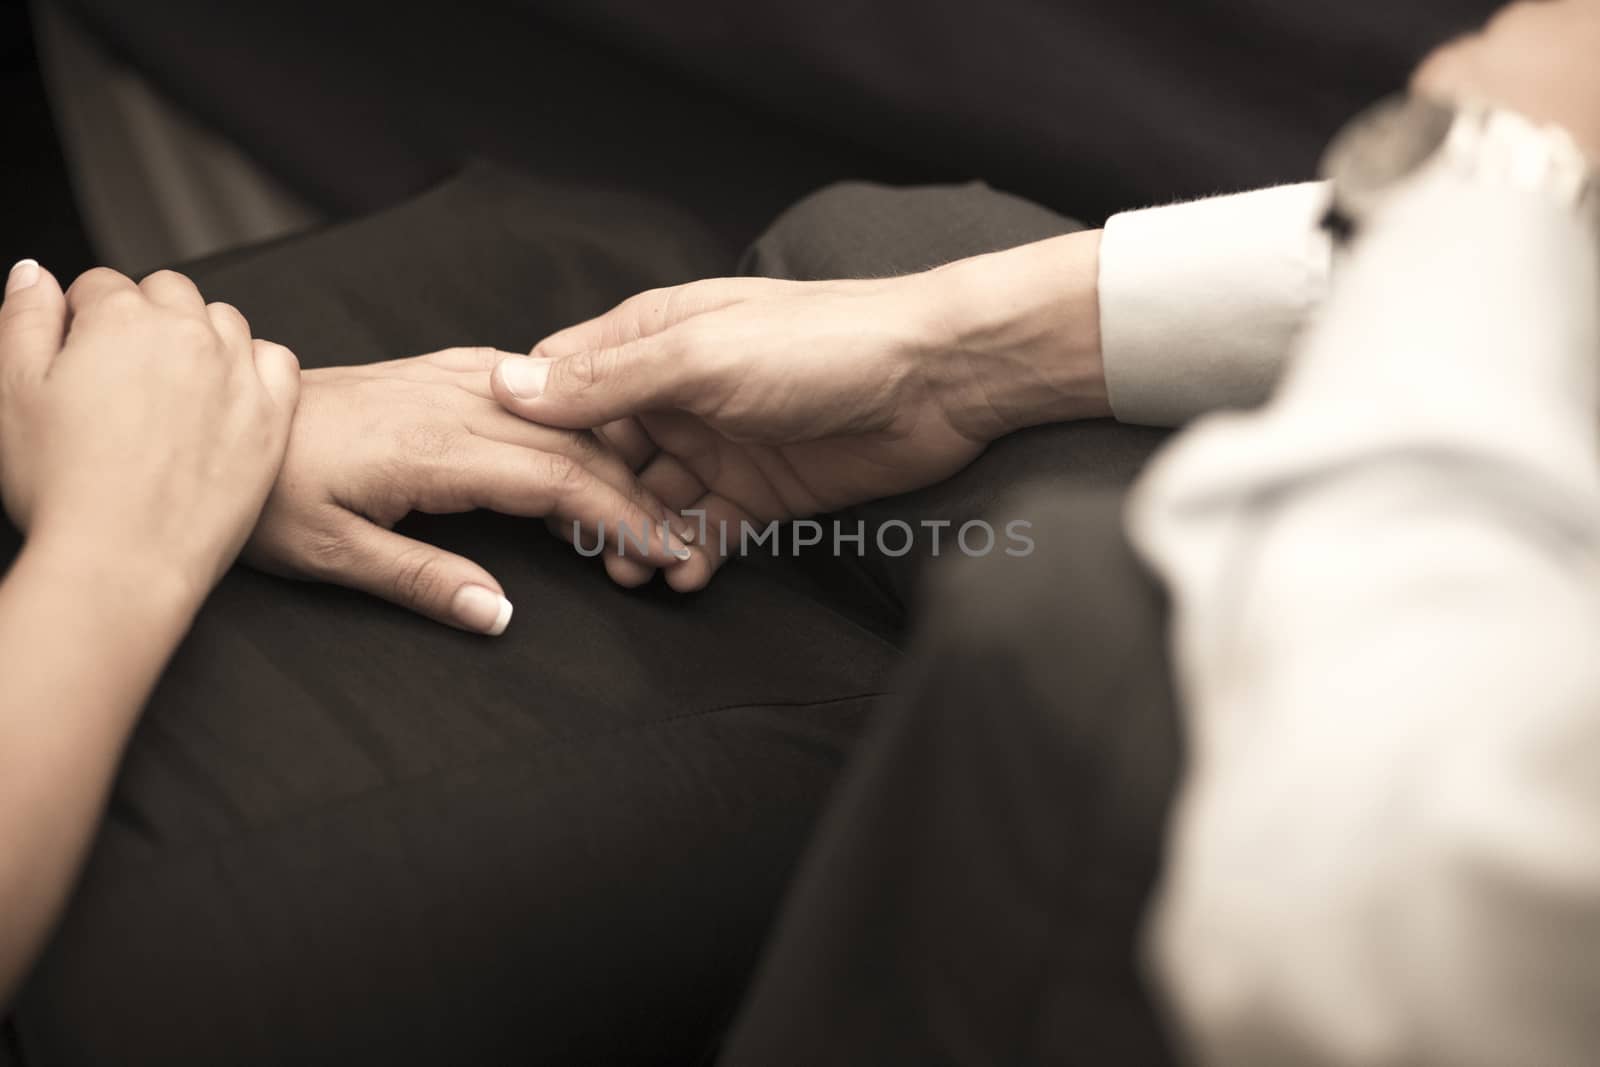 Color artistic digital rectangular horizontal photo of man wearing white suit and wrist watch and woman holding hands during wedding marriage banquet dinner in Madrid Spain. Shallow depth of on foreground with background out of focus. 